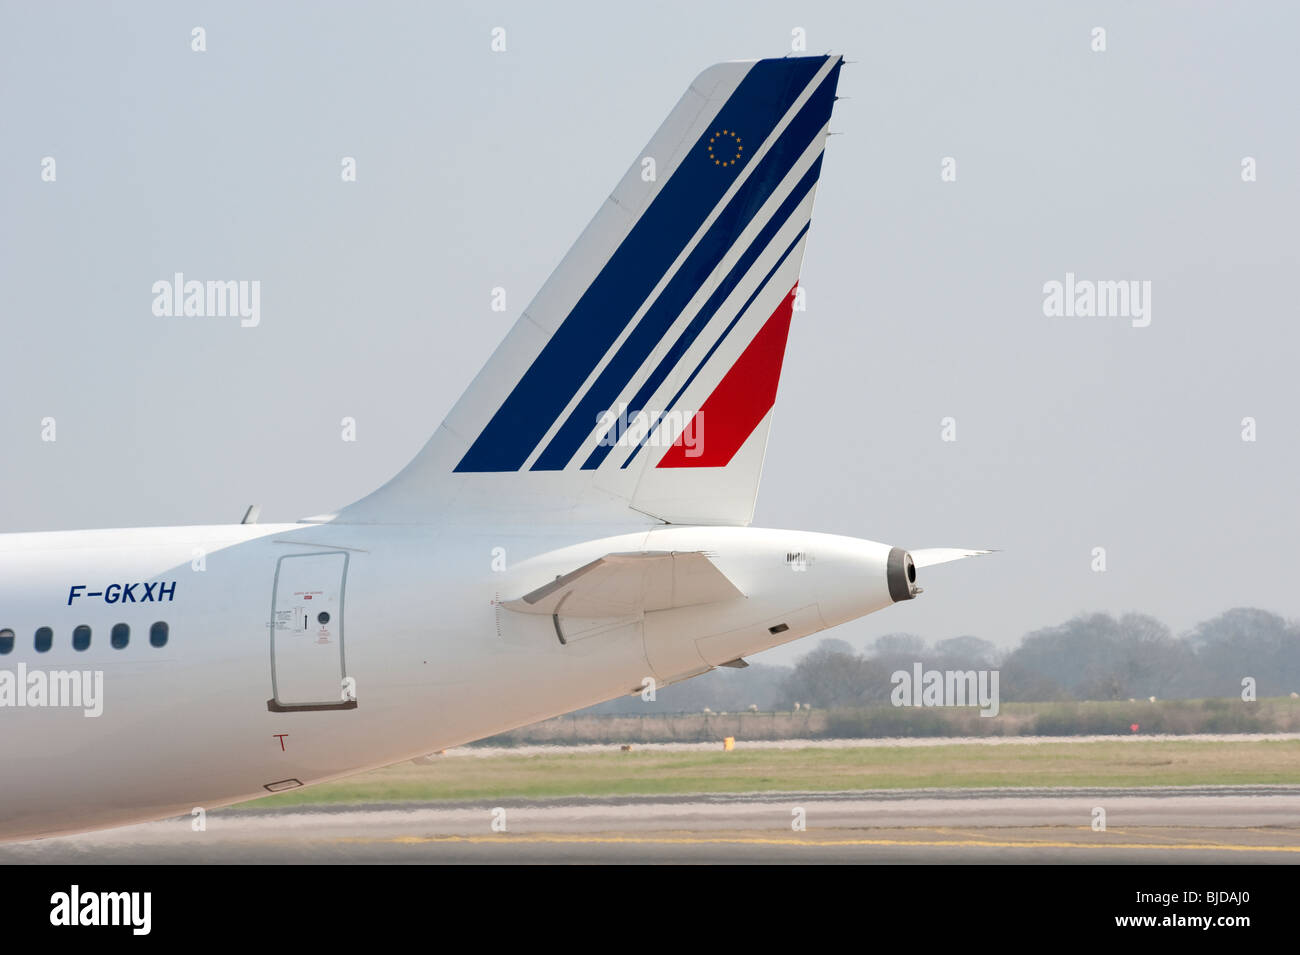 Air France tail fin of Airbus A320 214 Stock Photo